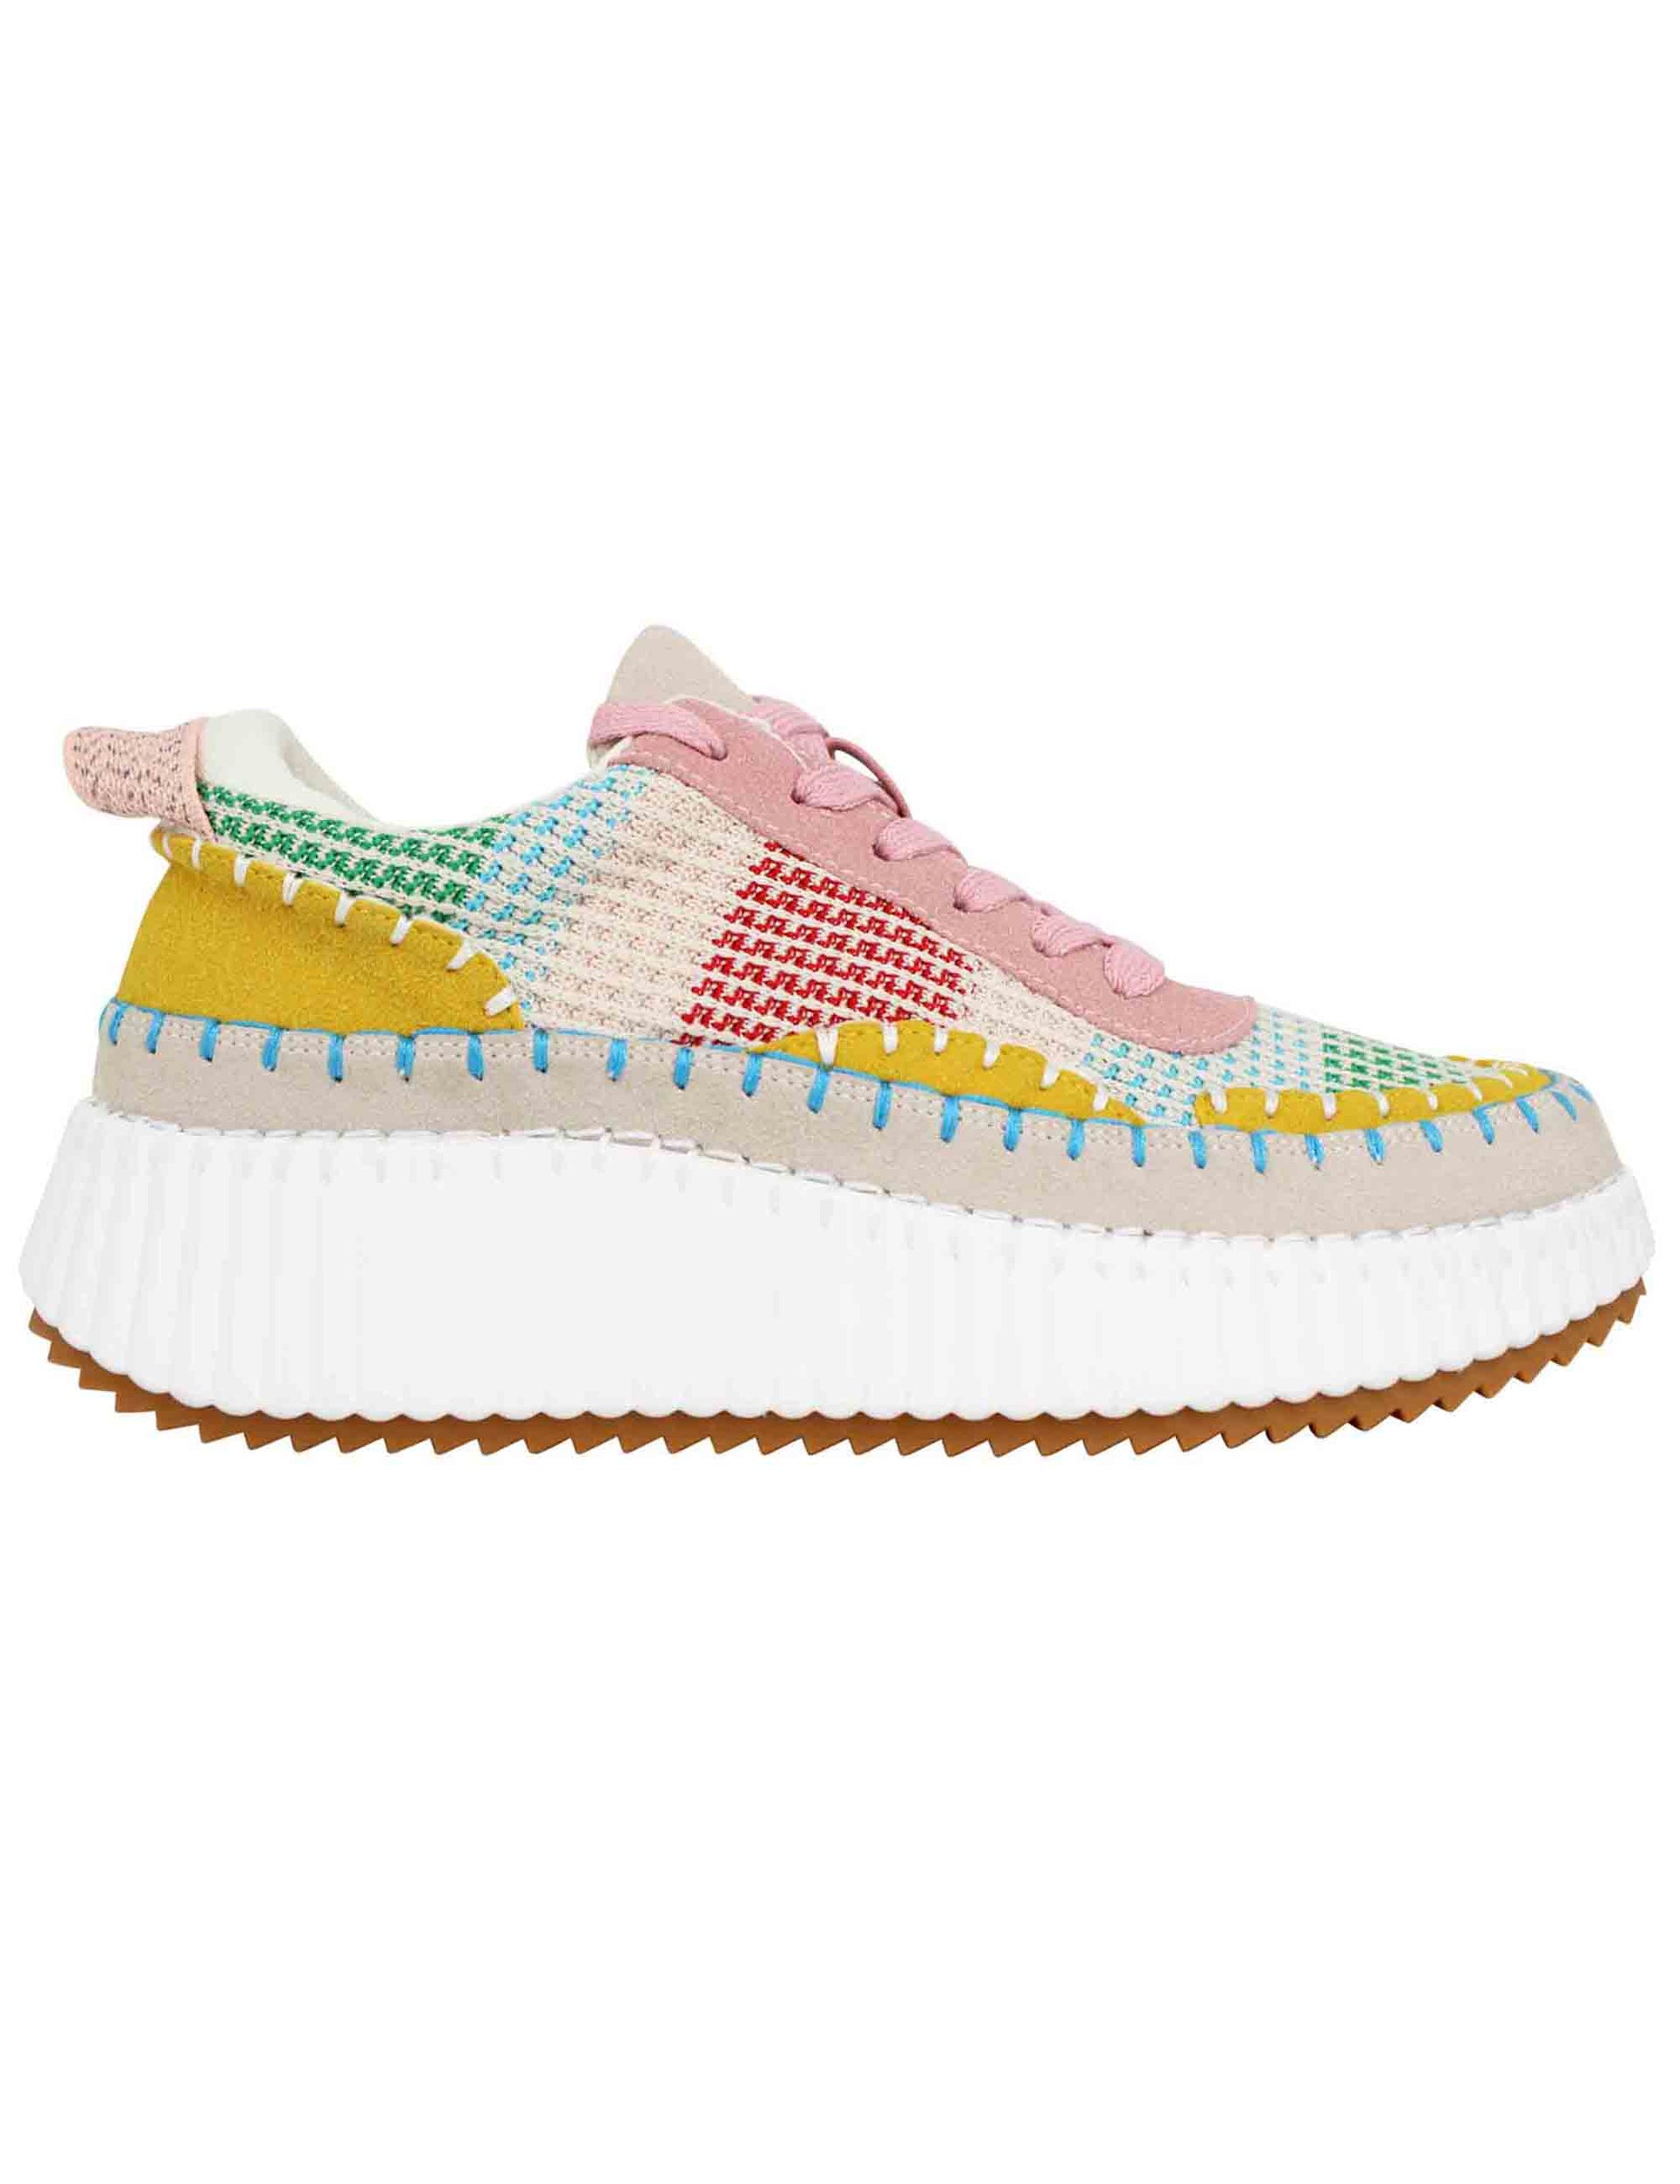 Women's sneakers in pink macrame fabric with high rubber sole